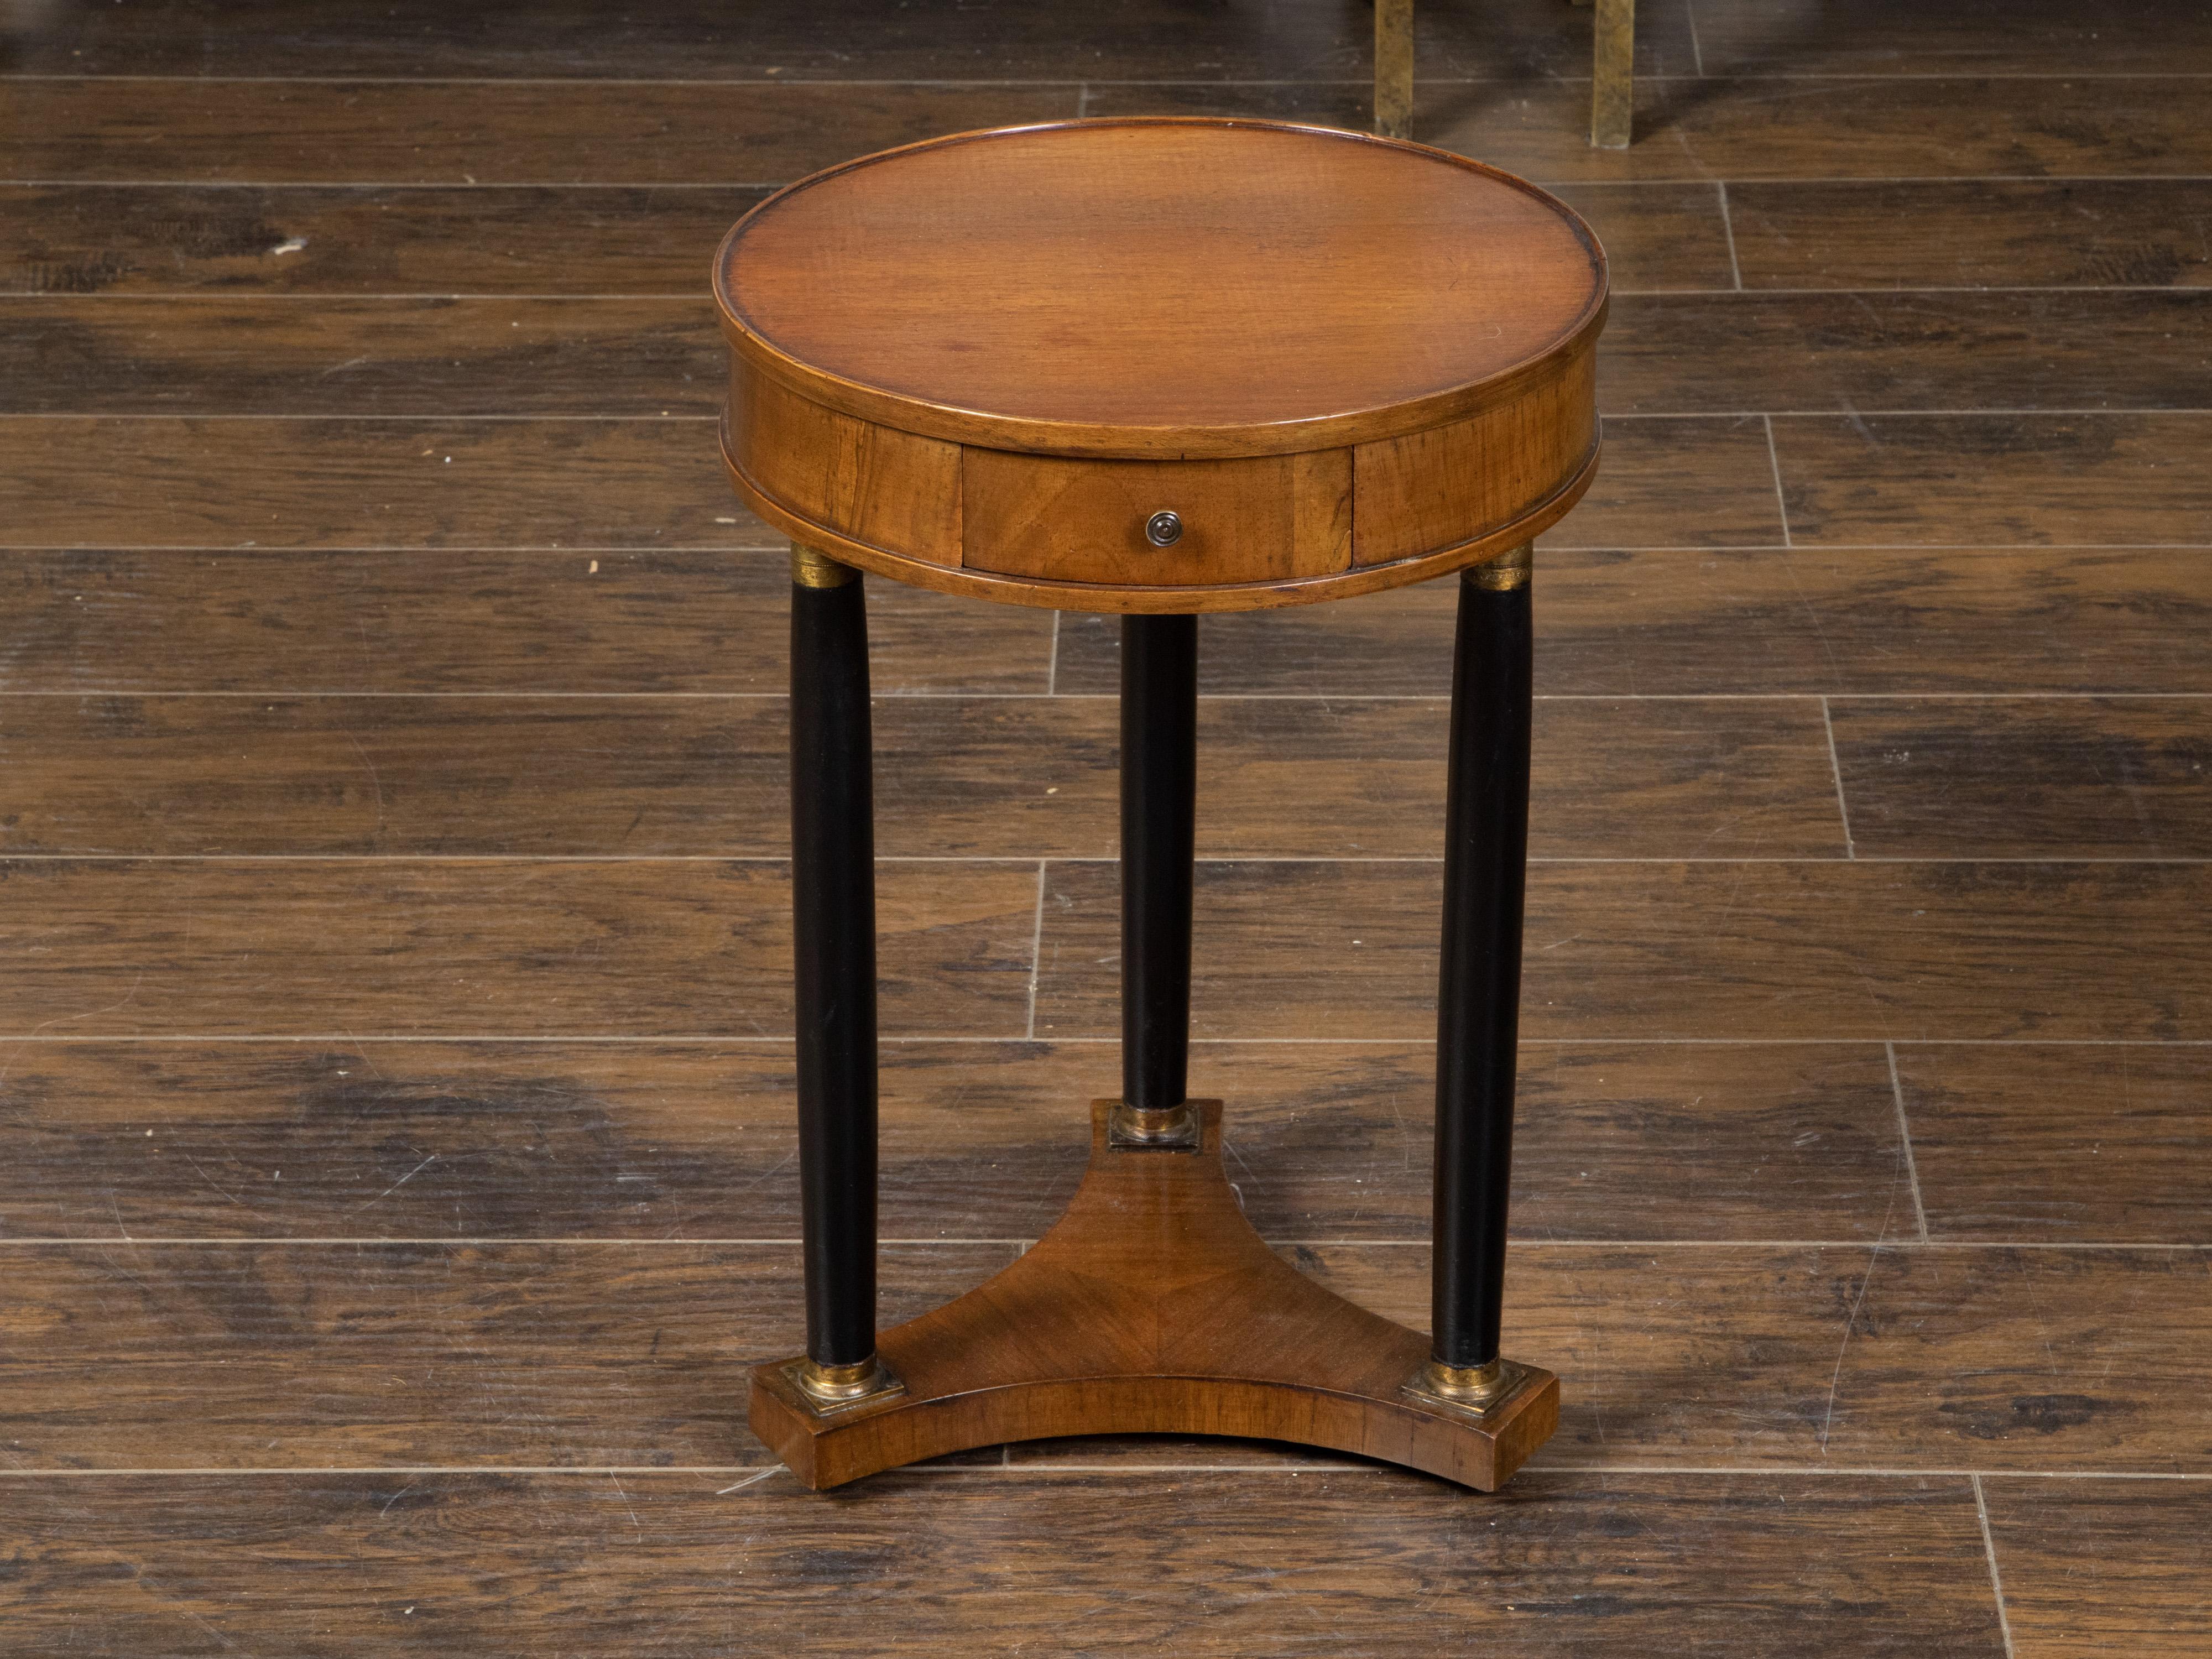 A French Empire style walnut drinks table from the mid 20th century, with ebonized columns and bronze mounts. Created in France during the Midcentury period, this walnut Empire style drinks table features a circular top sitting above a simple apron